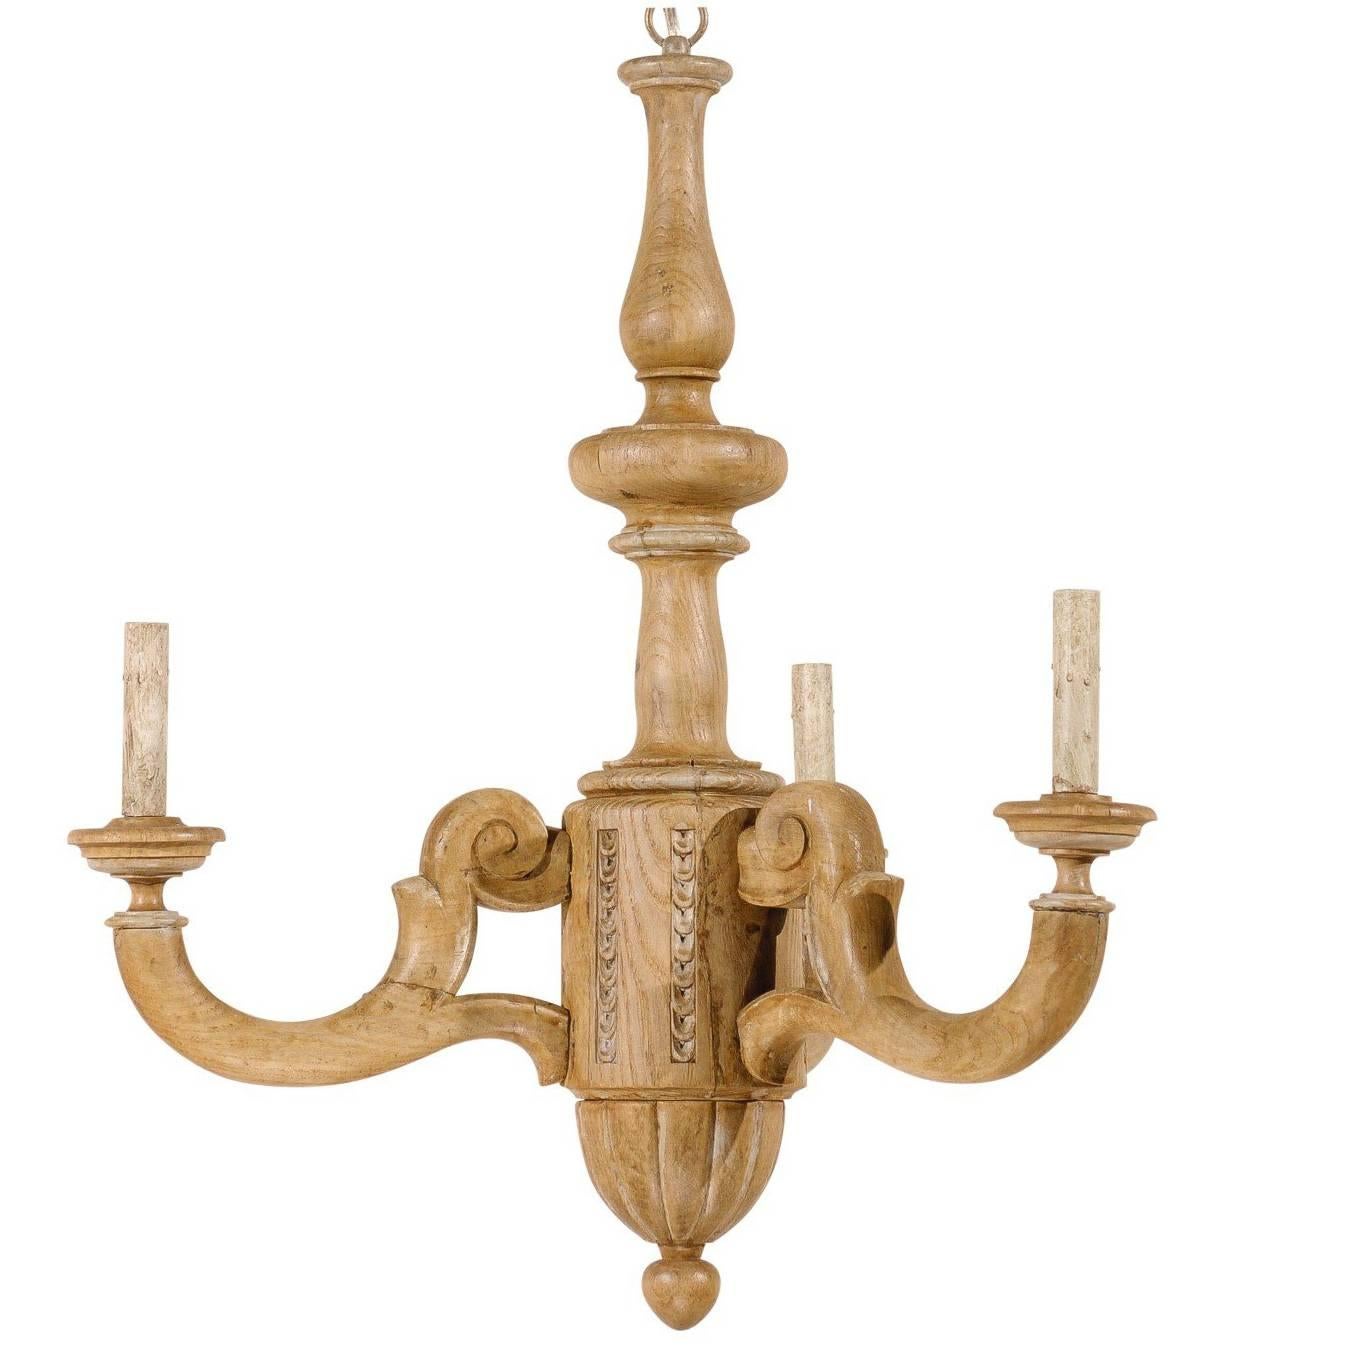 French Small Three-Light Natural Wood Chandelier in Warm Tan Wood Color